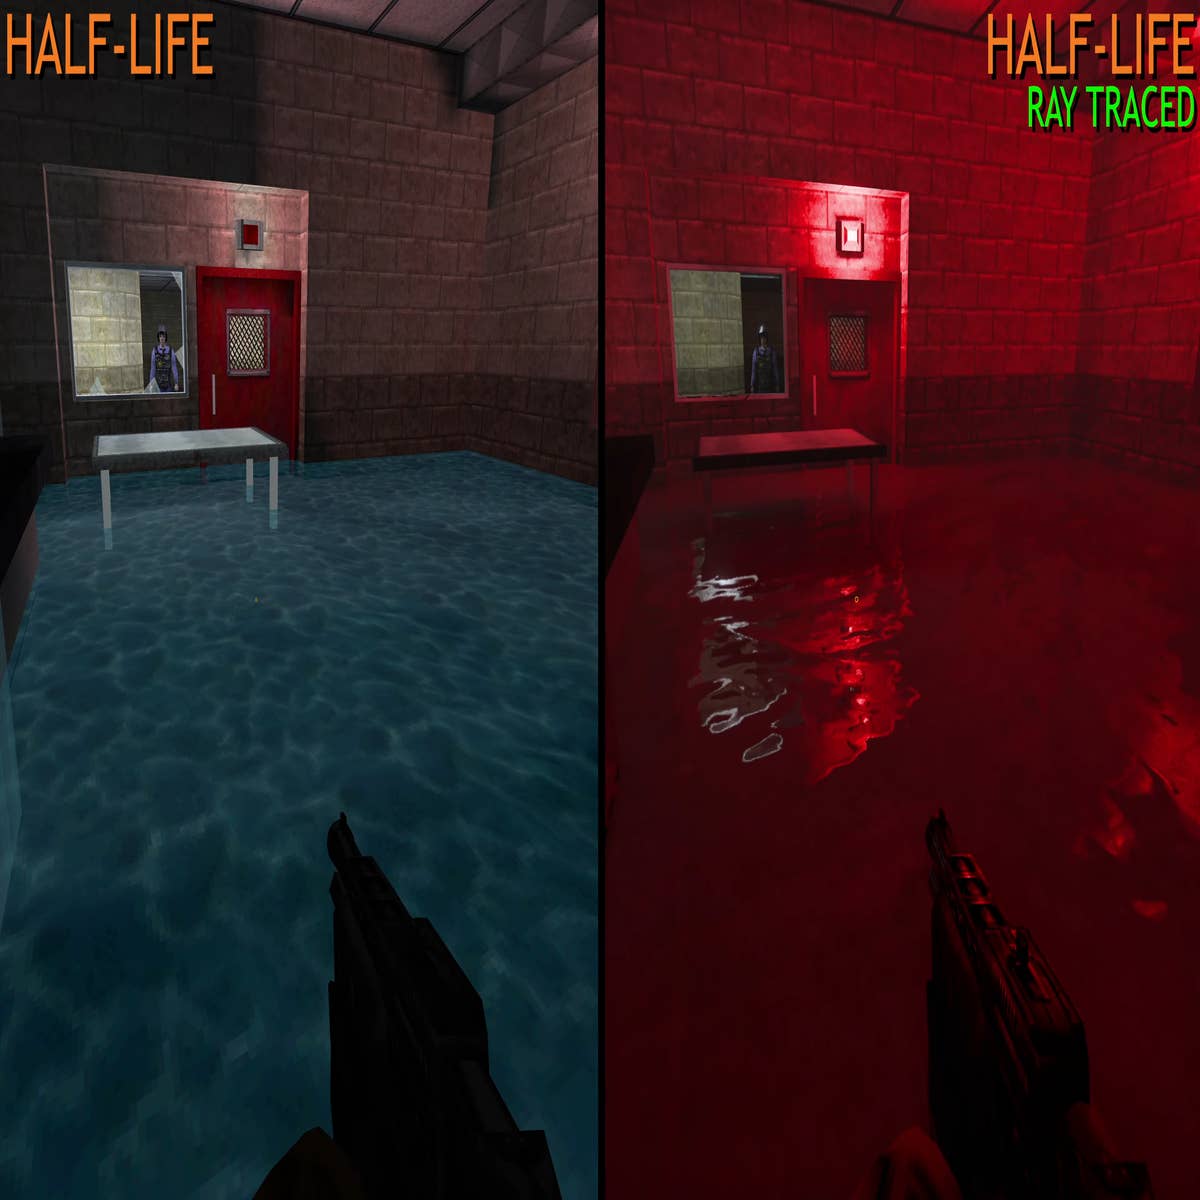 Half-Life mod adds real-time ray tracing to Valve's seminal first